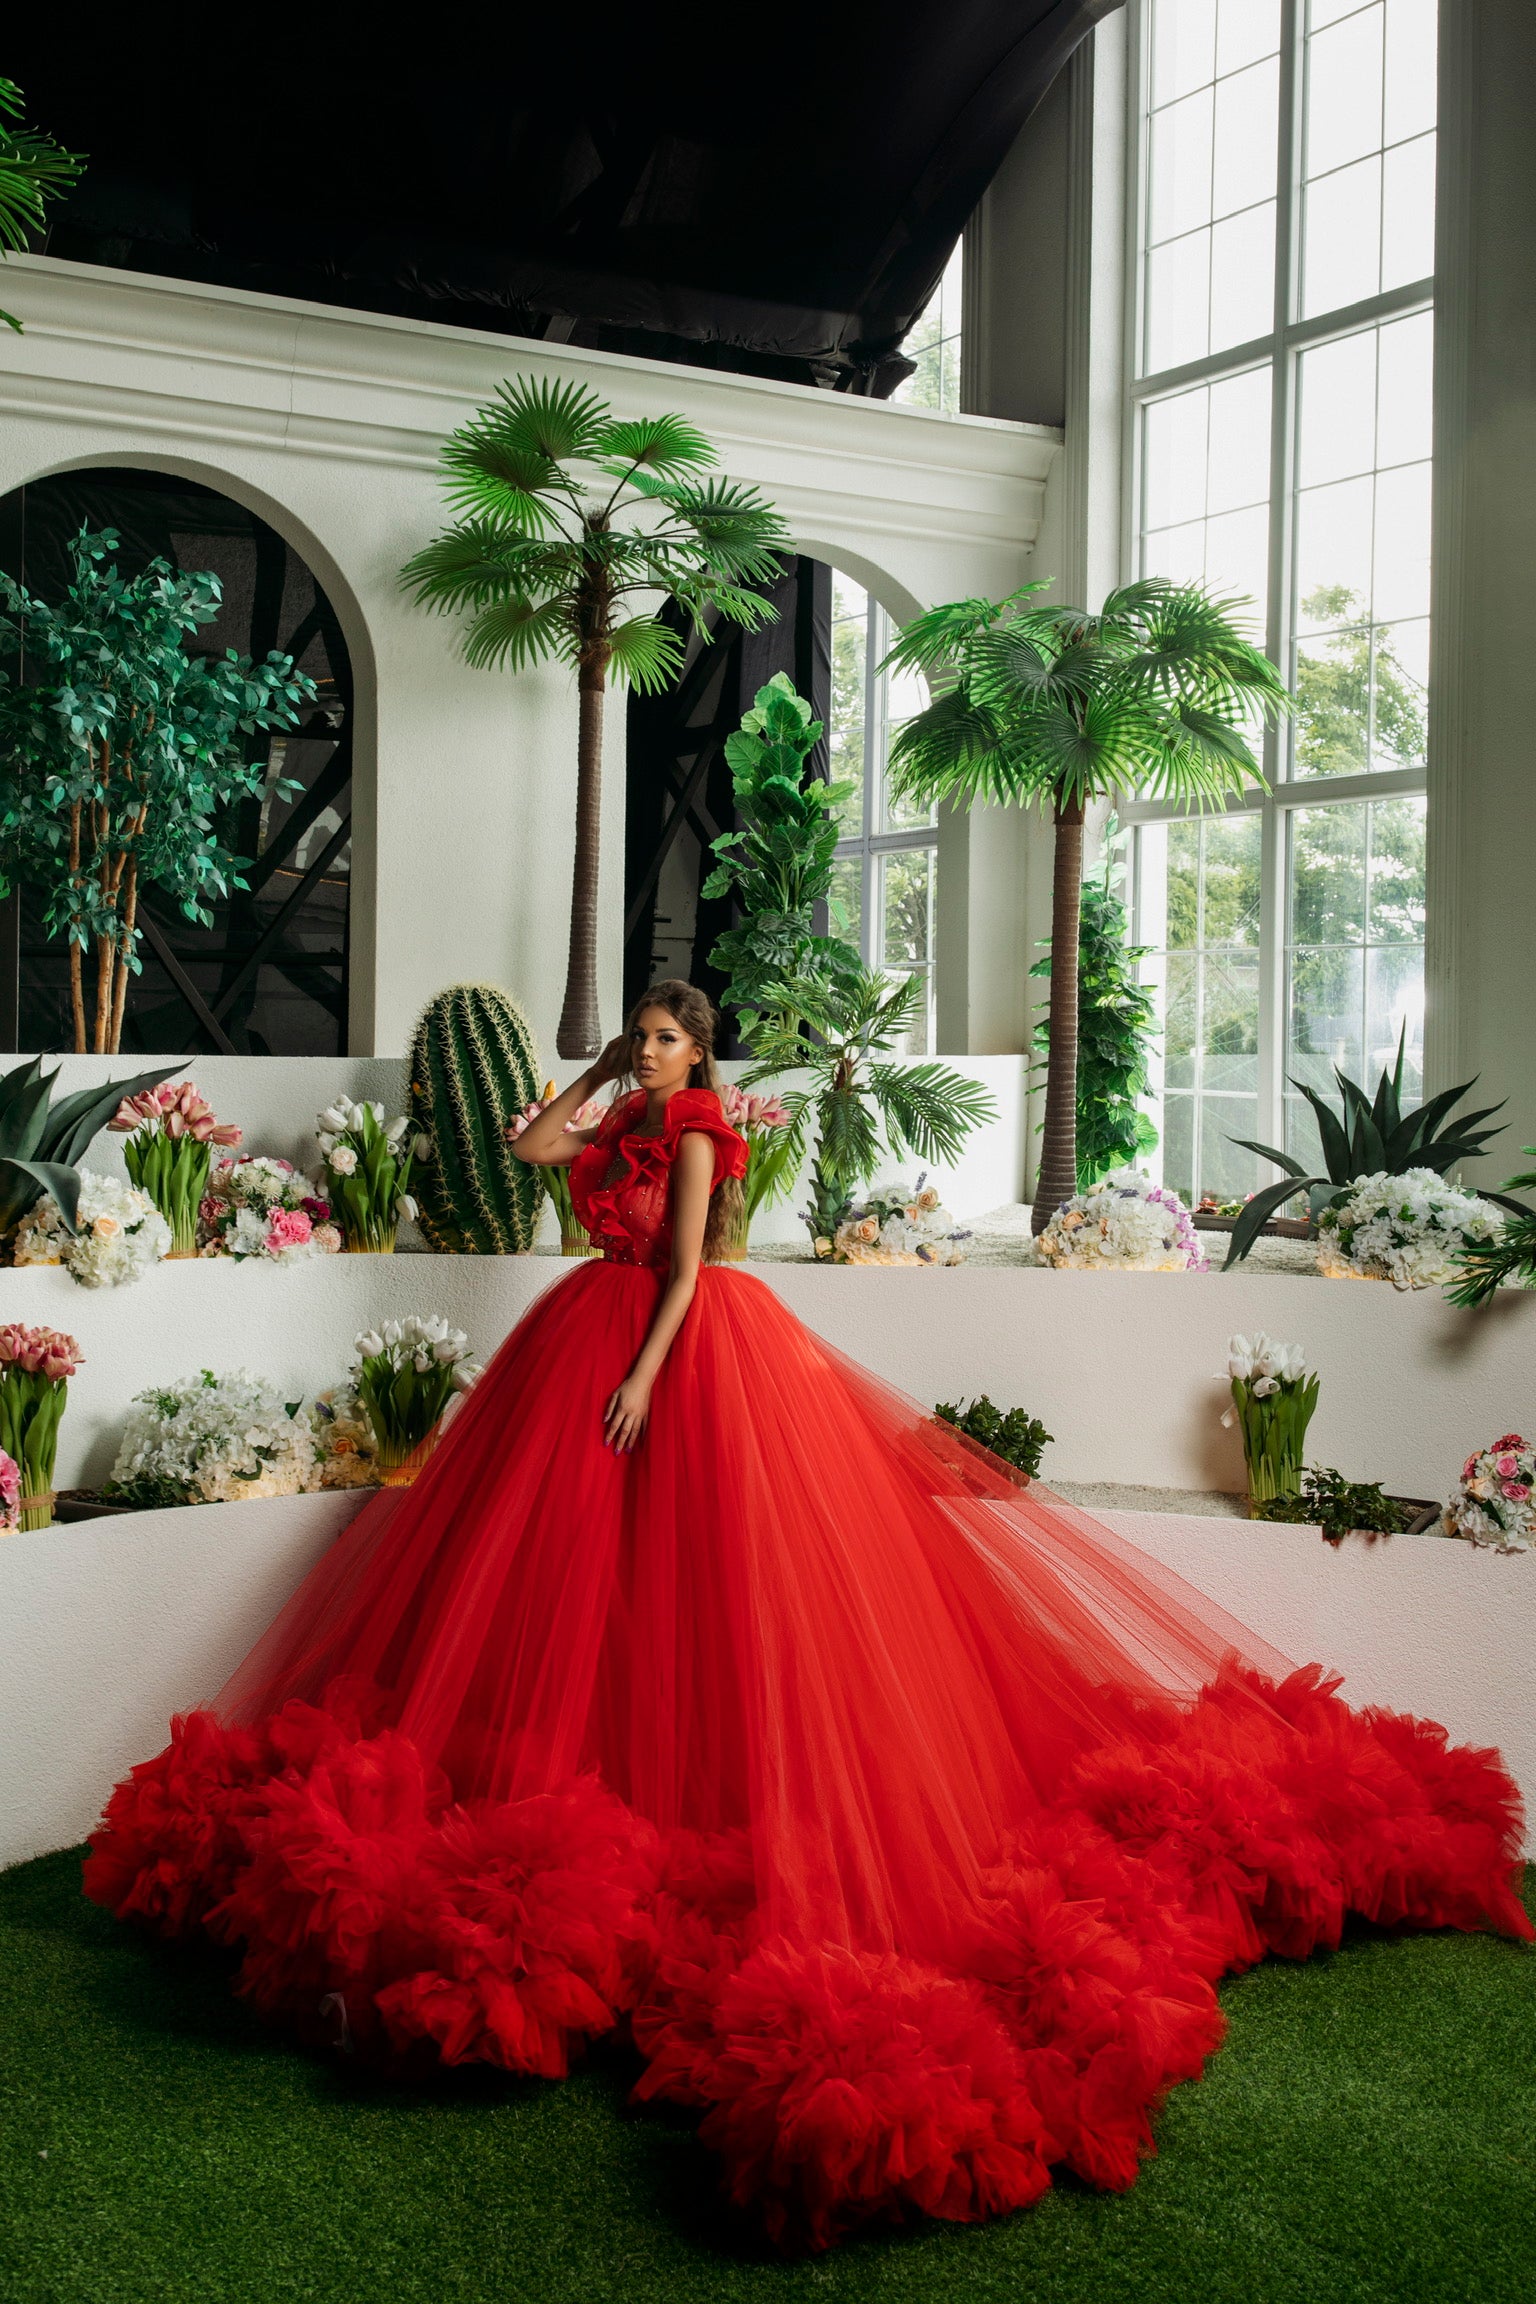 Chic / Beautiful Red Evening Dresses 2020 A-Line / Princess  Off-The-Shoulder Short Sleeve Backless Beading Sash Glitter Tulle  Floor-Length / Long Ruffle Formal Dresses